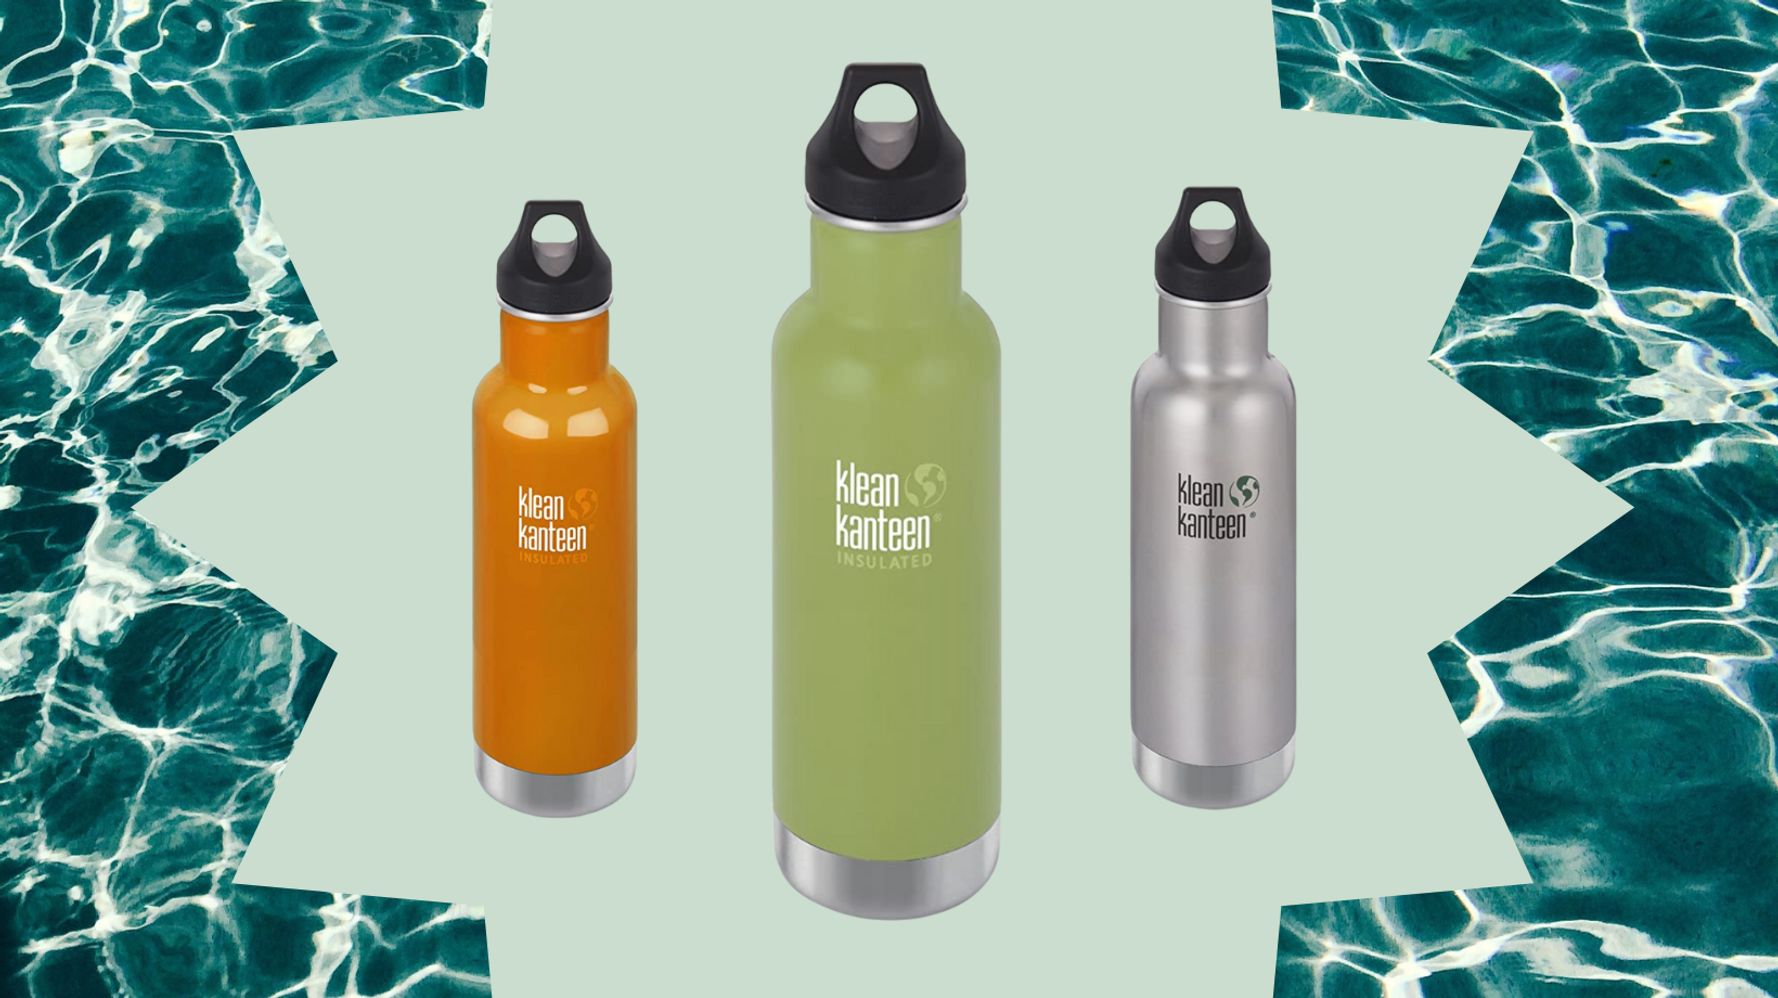 Klean Kanteen Stainless Steel Water Bottle -- every purchase